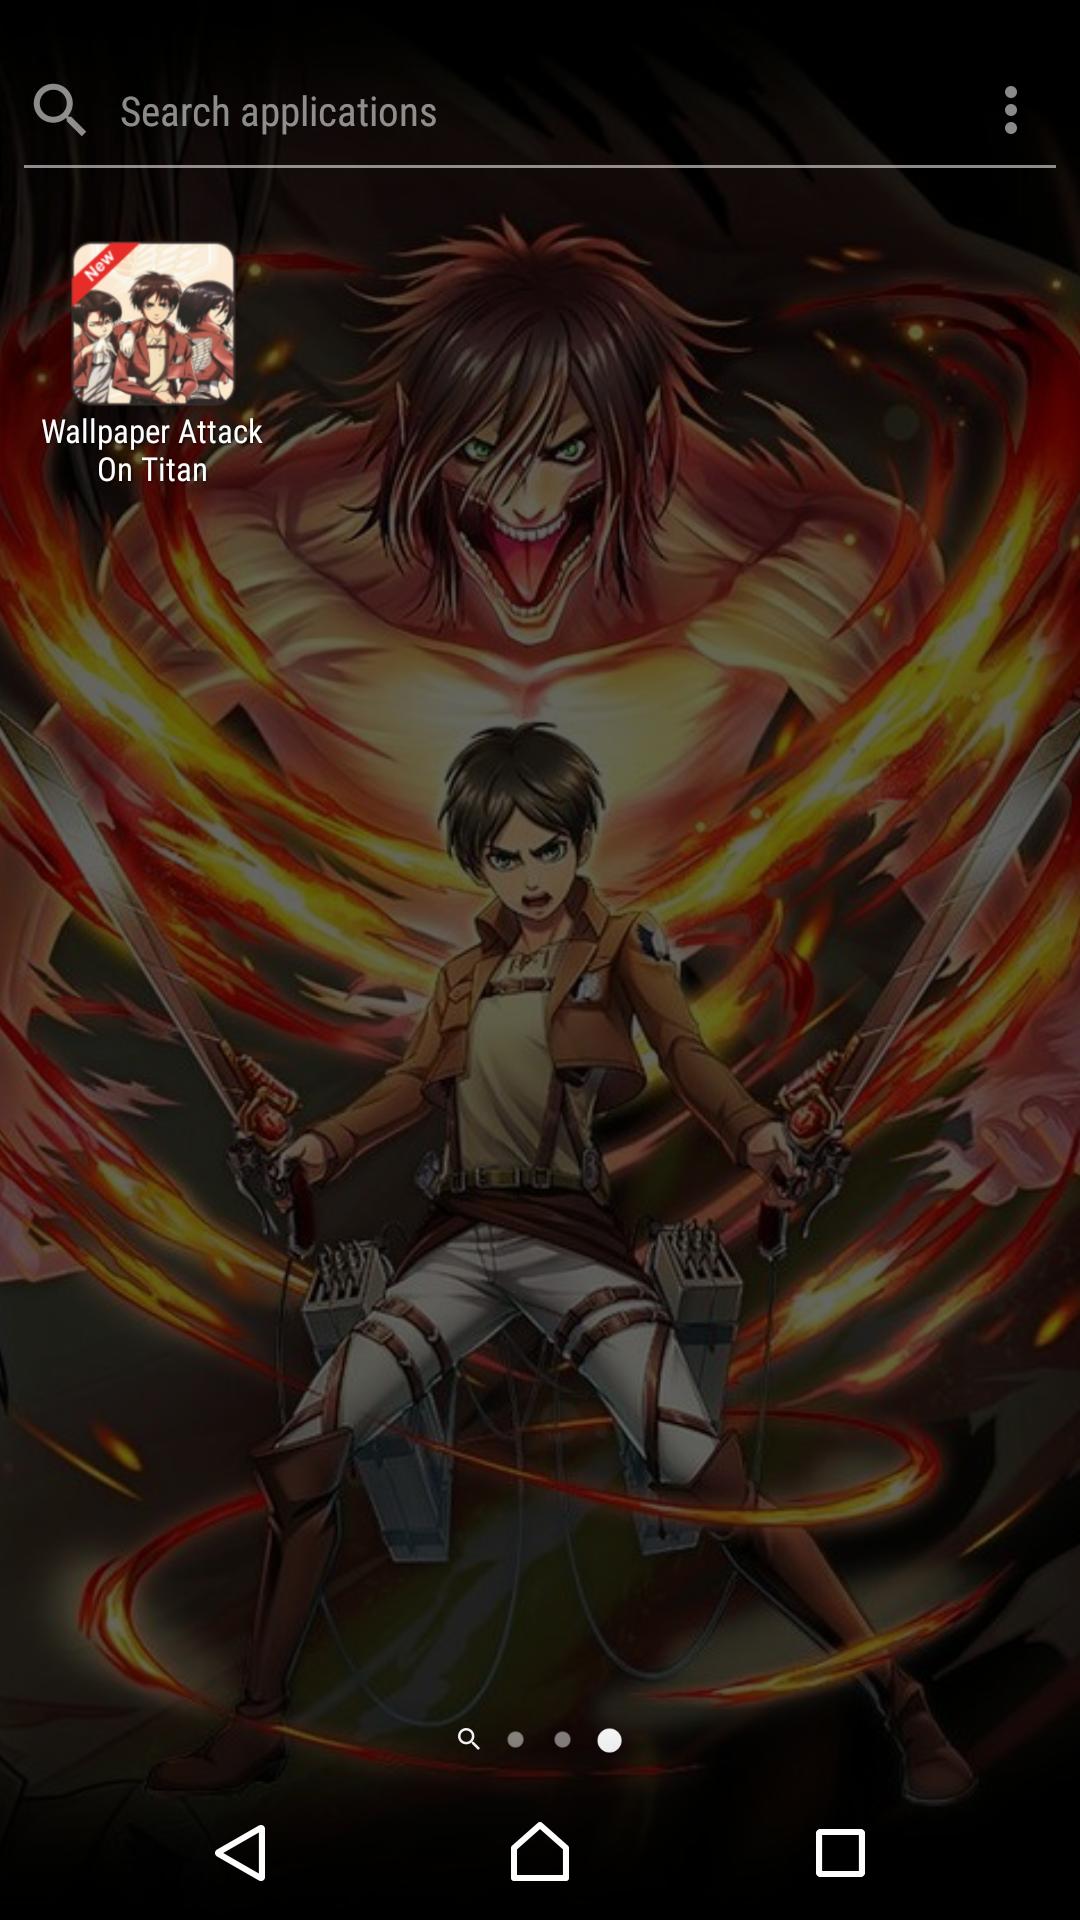 Wallpaper Attack Titan Hd For Android Apk Download